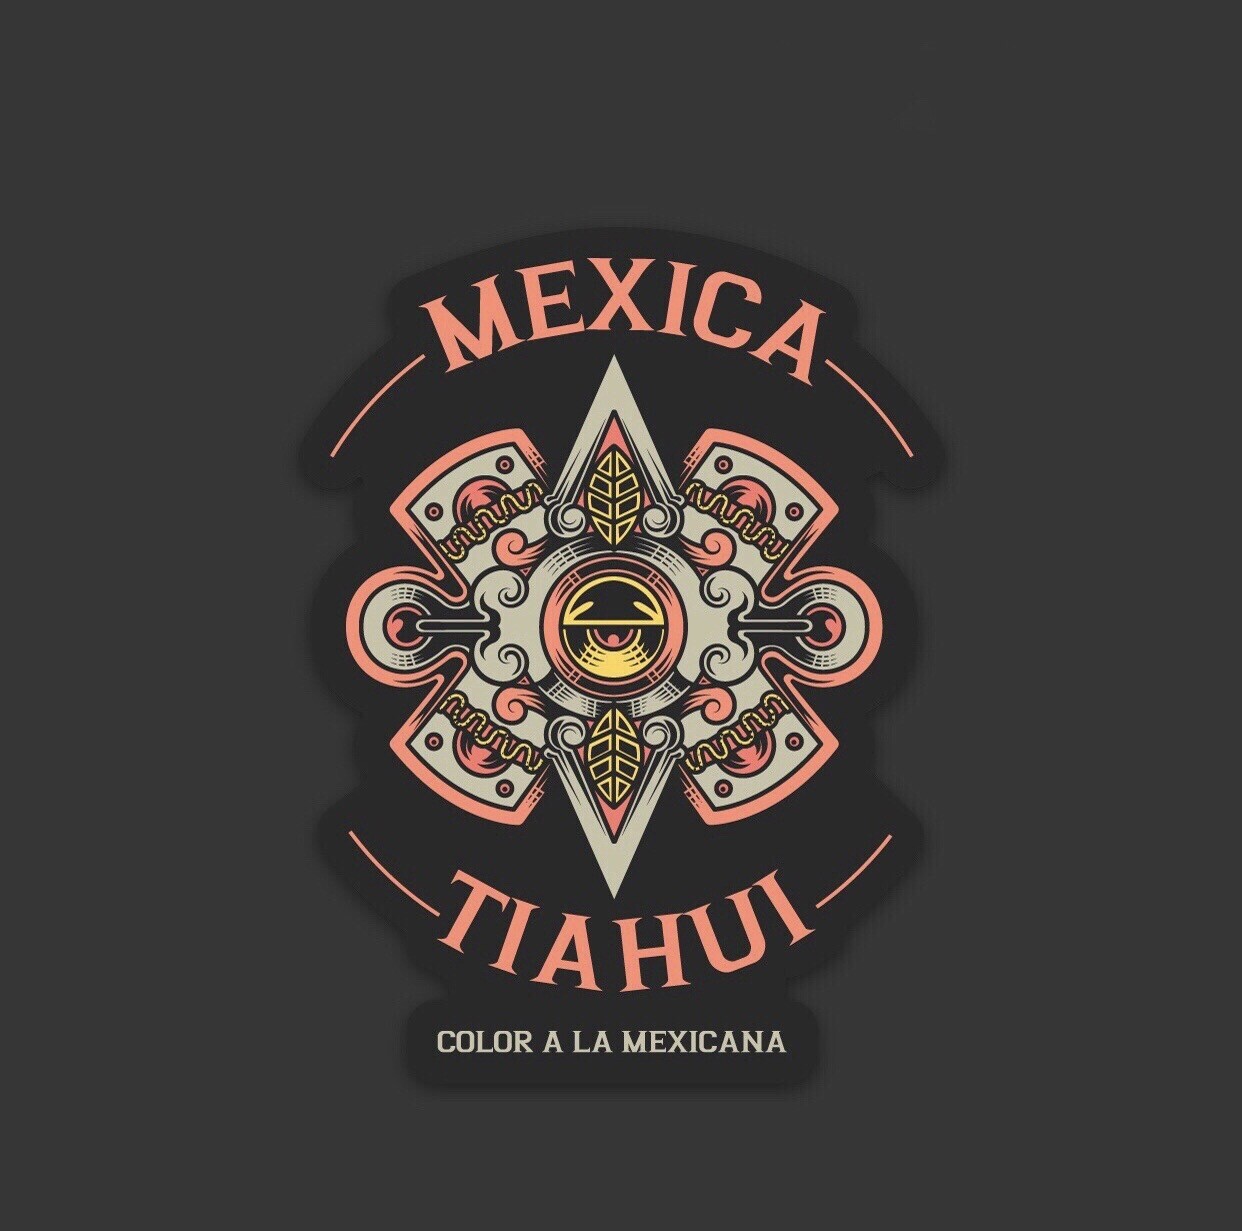 COLOR A LA MEXICANA | Ethical Fashion, Graphic T-Shirts & High Quality ...